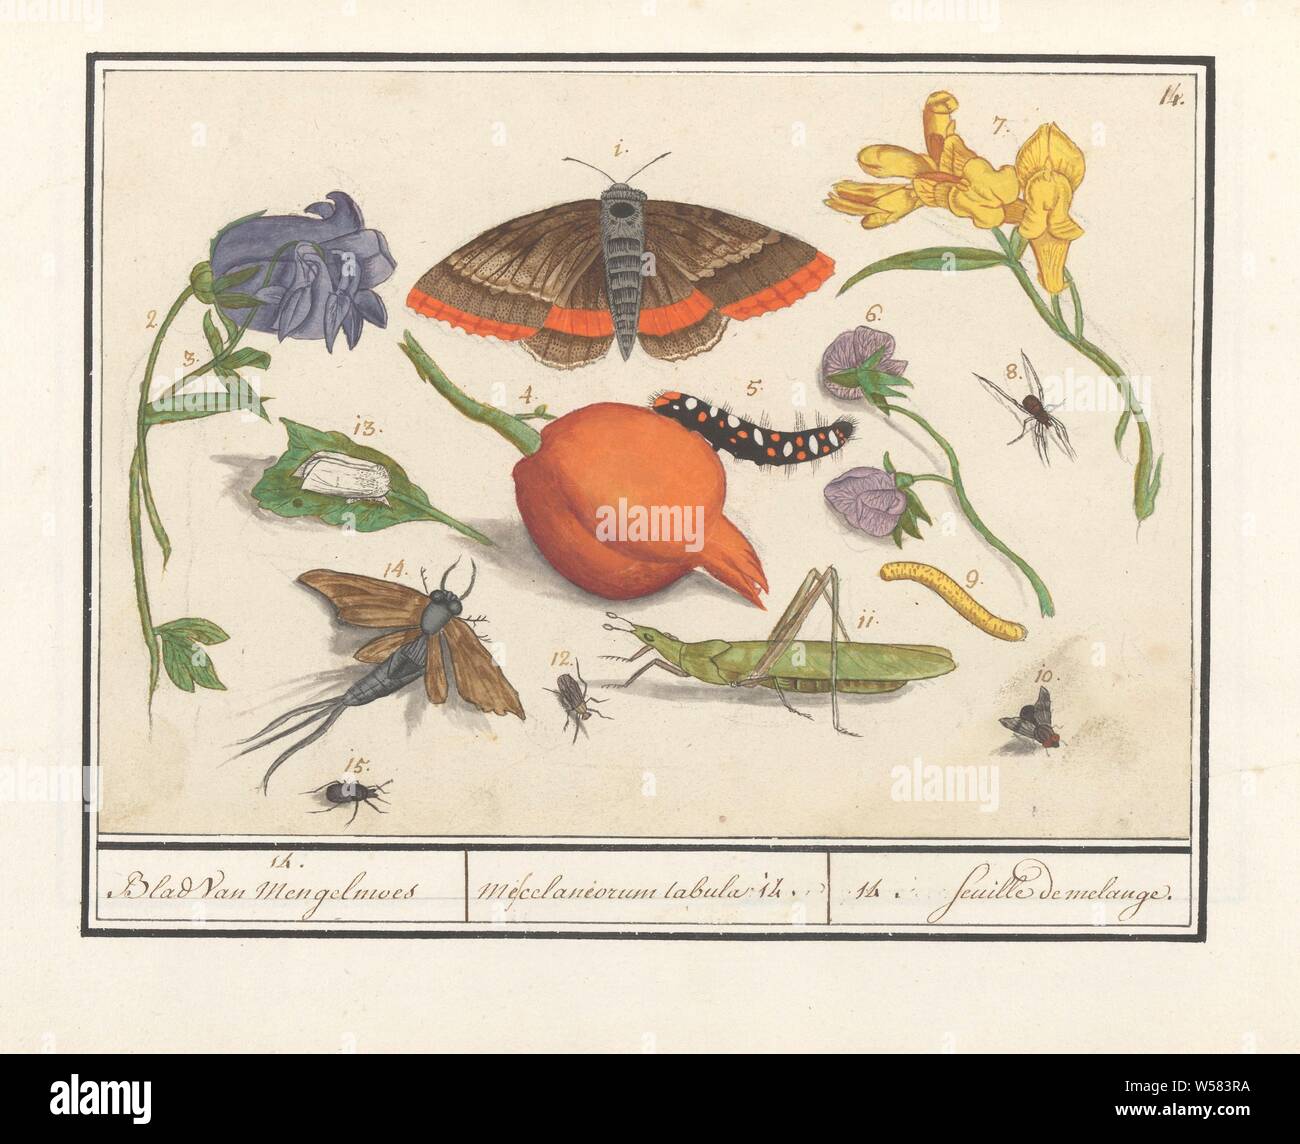 Natural history ensemble (no. 14), 14. Sheet of Mengelmoes / Miscelaniorum tabula 14. / 14. feuille de melange (title on object), Sheet with the fourteenth natural history ensemble with animals and plants, numbers 1-15. Insects (moths, flies, beetles, caterpillars), spider, grasshopper, fruit and flowers. Numbered top right: 14. Part of the seventh album with drawings of reptiles, amphibians and natural history ensembles. The seventh of twelve albums with watercolors of animals, birds and plants, known around 1600, commissioned by Emperor Rudolf II. With explanations in Dutch, Latin and French Stock Photo